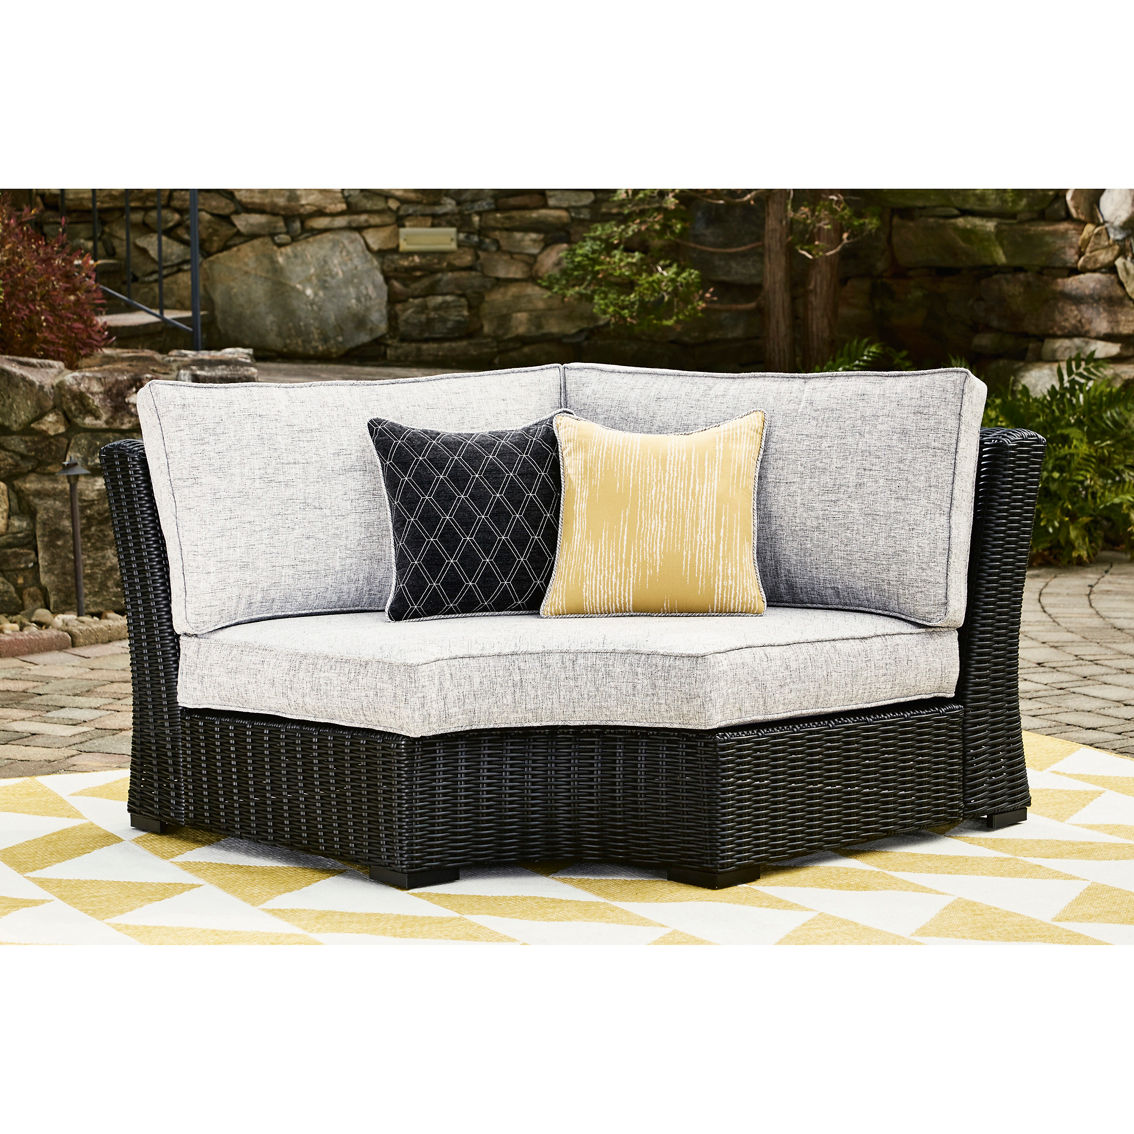 Signature Design by Ashley Beachcroft 5 pc. Outdoor Sectional with Firepit Table - Image 5 of 9